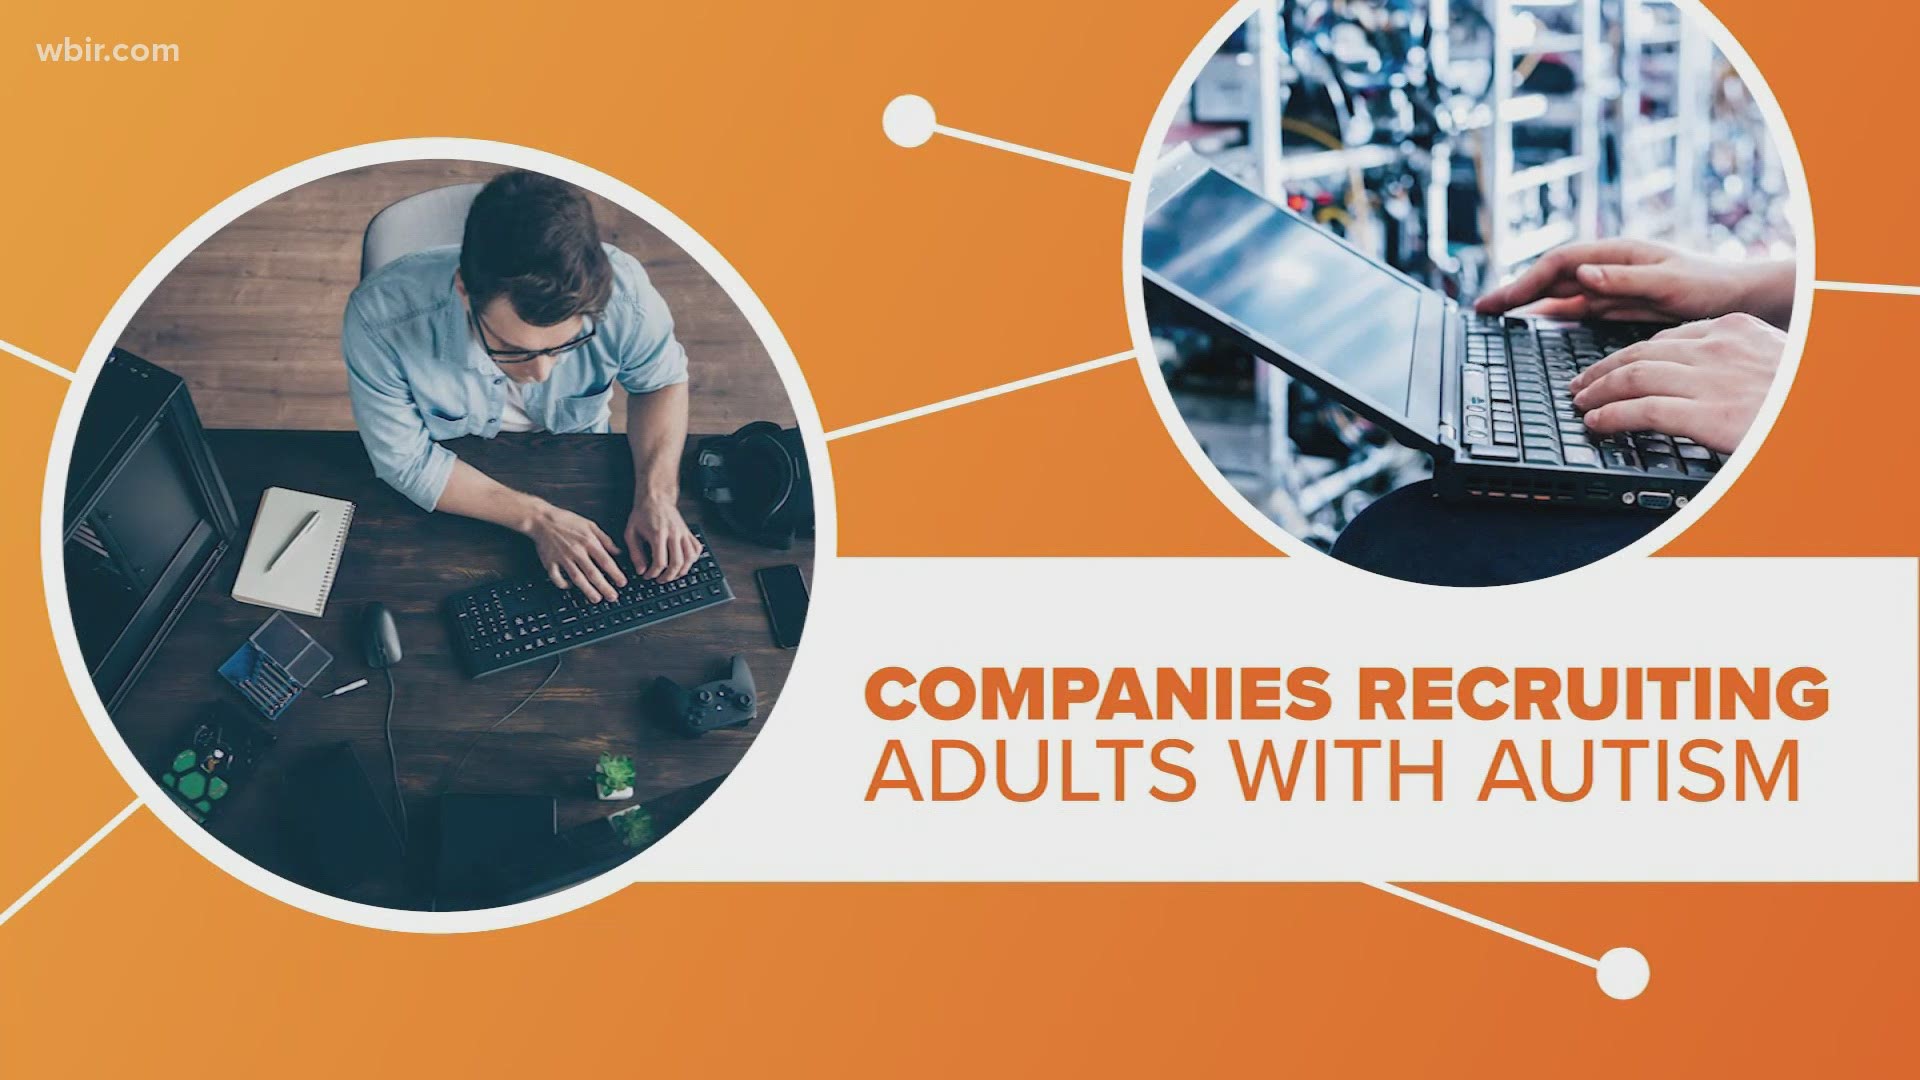 More and more high profile companies are discovering an untapped workforce, adults on the autism spectrum. Let's connect the dots.